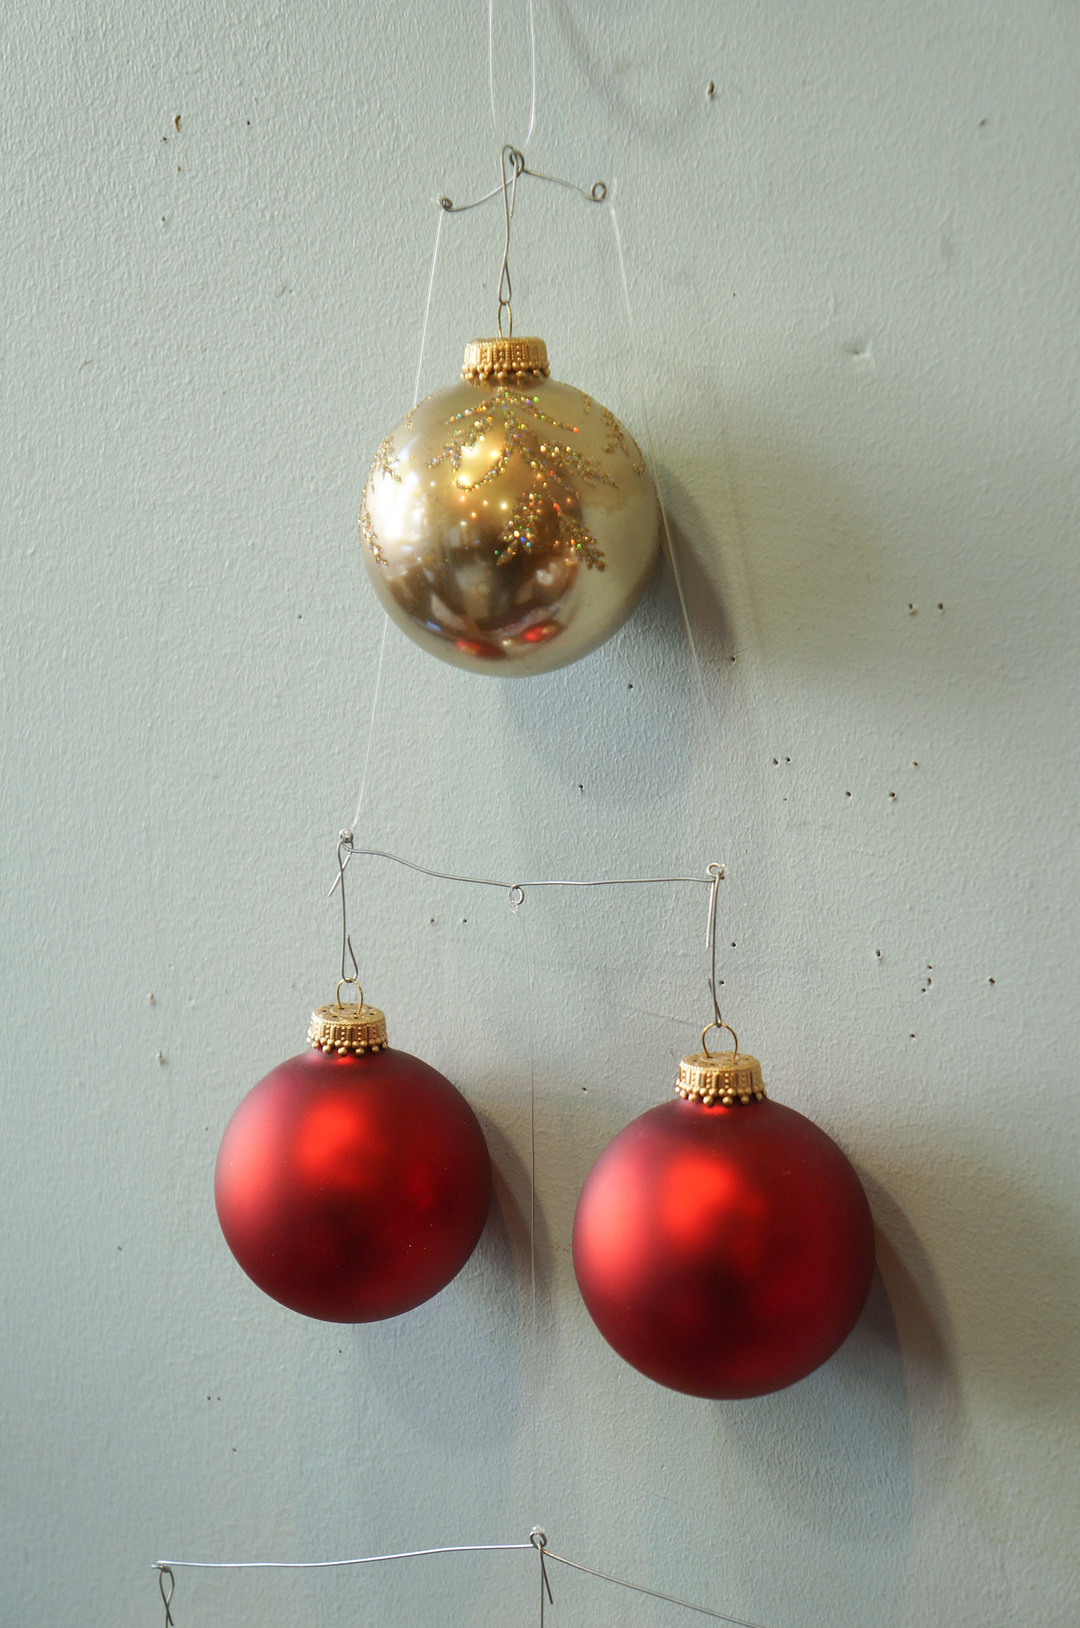 Vintage Blown Glass Christmas Ball Ornament/ヴィンテージ クリスマス オーナメント 吹きガラス ボール レトロ 6個セット 9